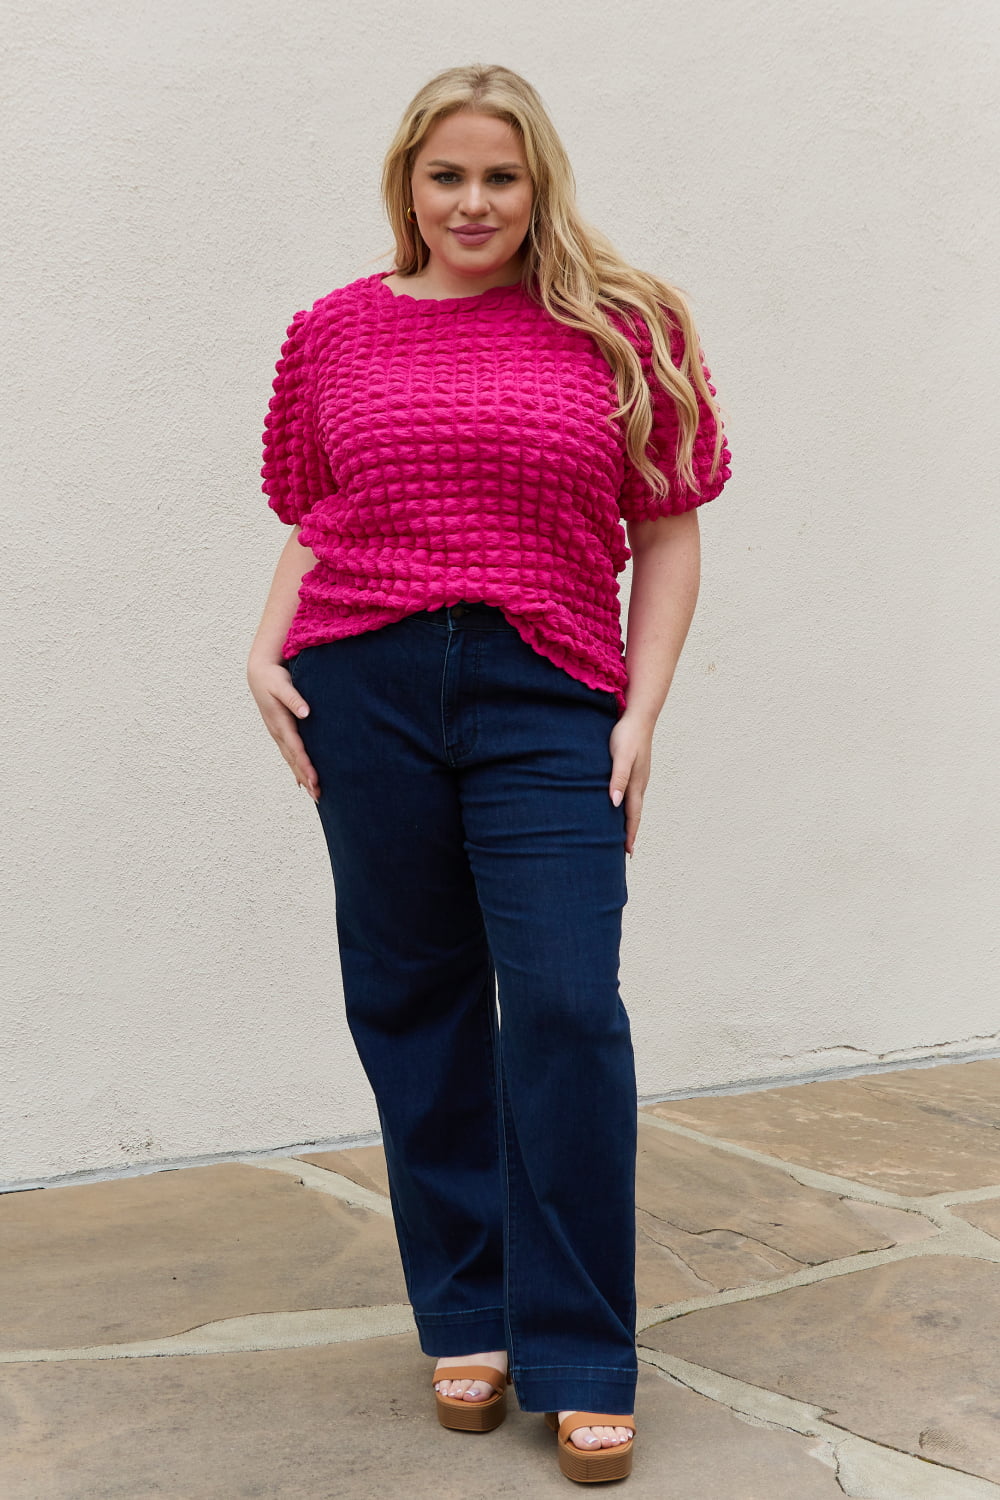 Bubble Textured Puff Sleeve Top in Hot PinkTopAnd the Why